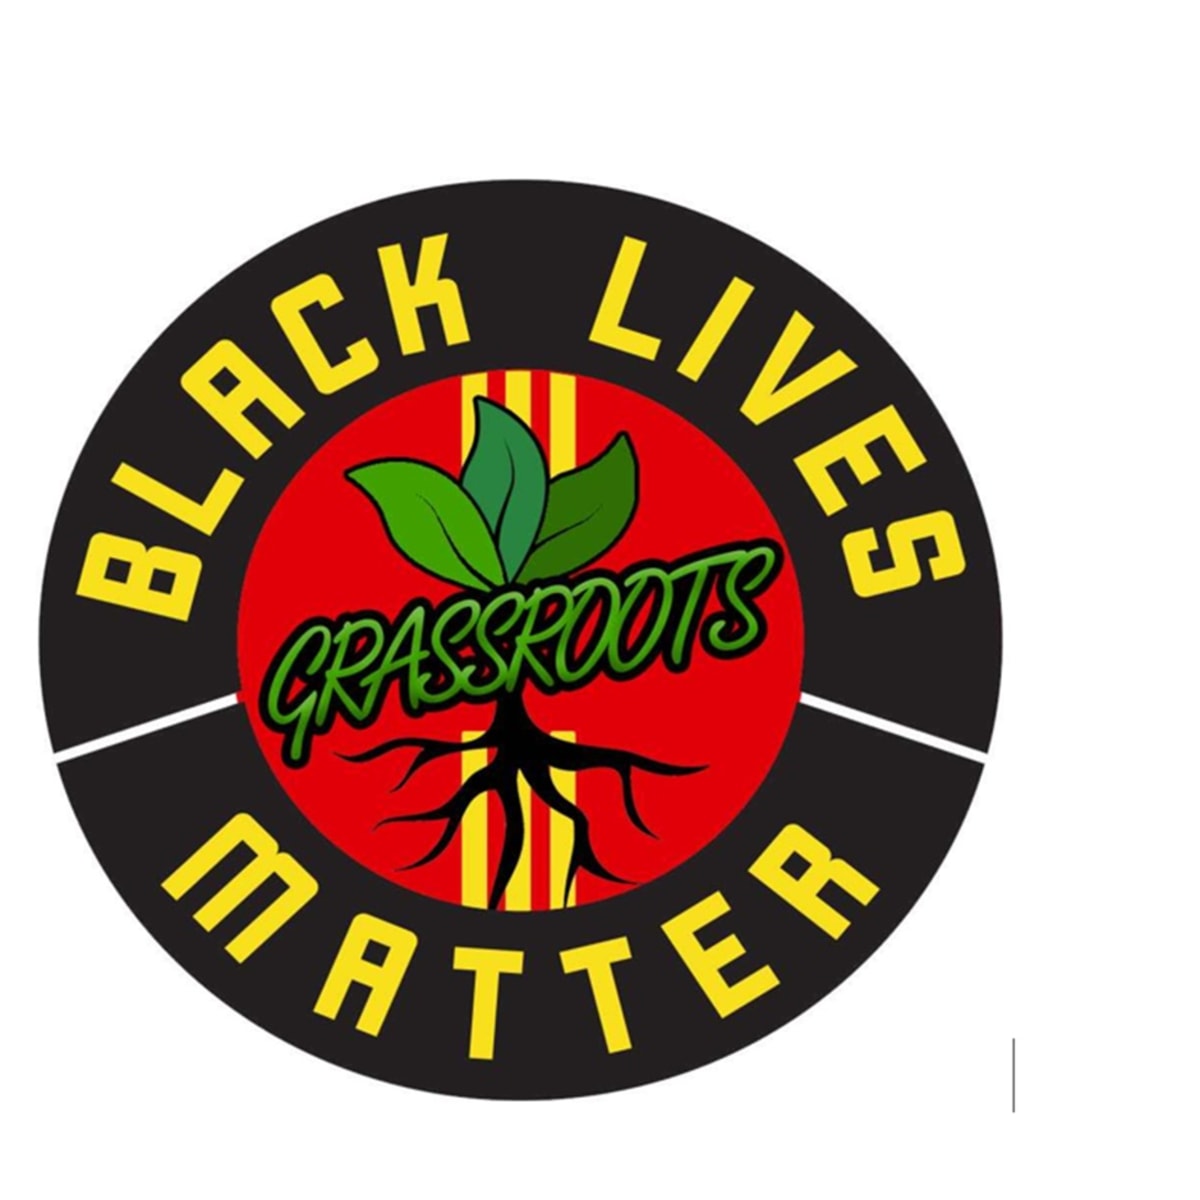 BLM Grass Roots is Not The BLM Global Network Foundation - LA